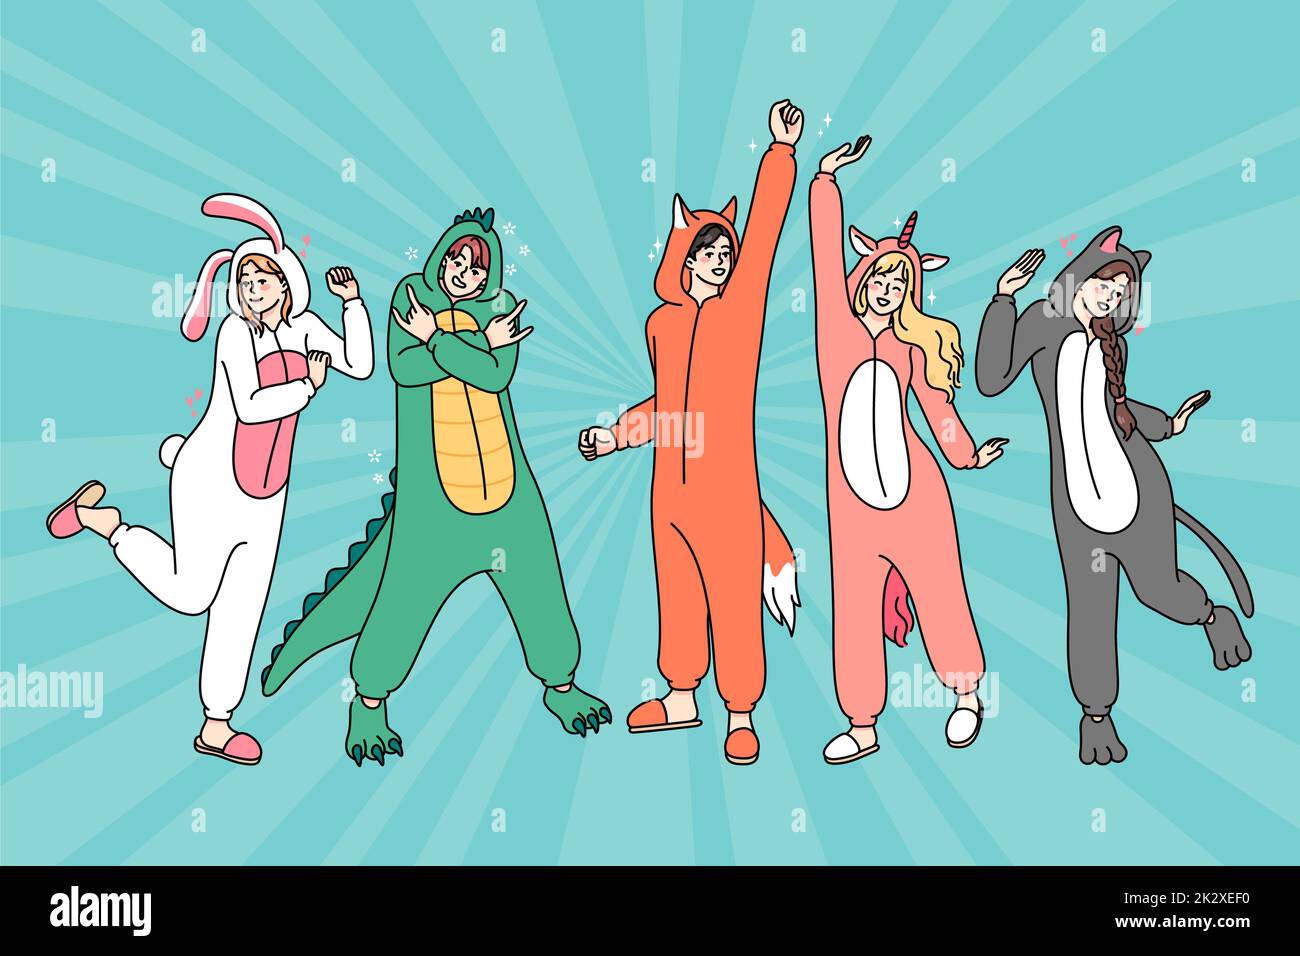 Happy people in animal costumes dancing Stock Photo